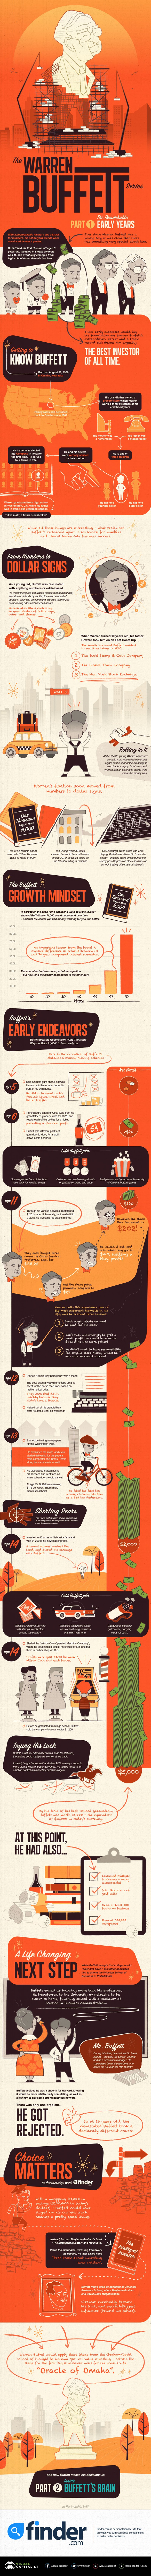 The Warren Buffett Series: The Remarkable Early Years #Infographic